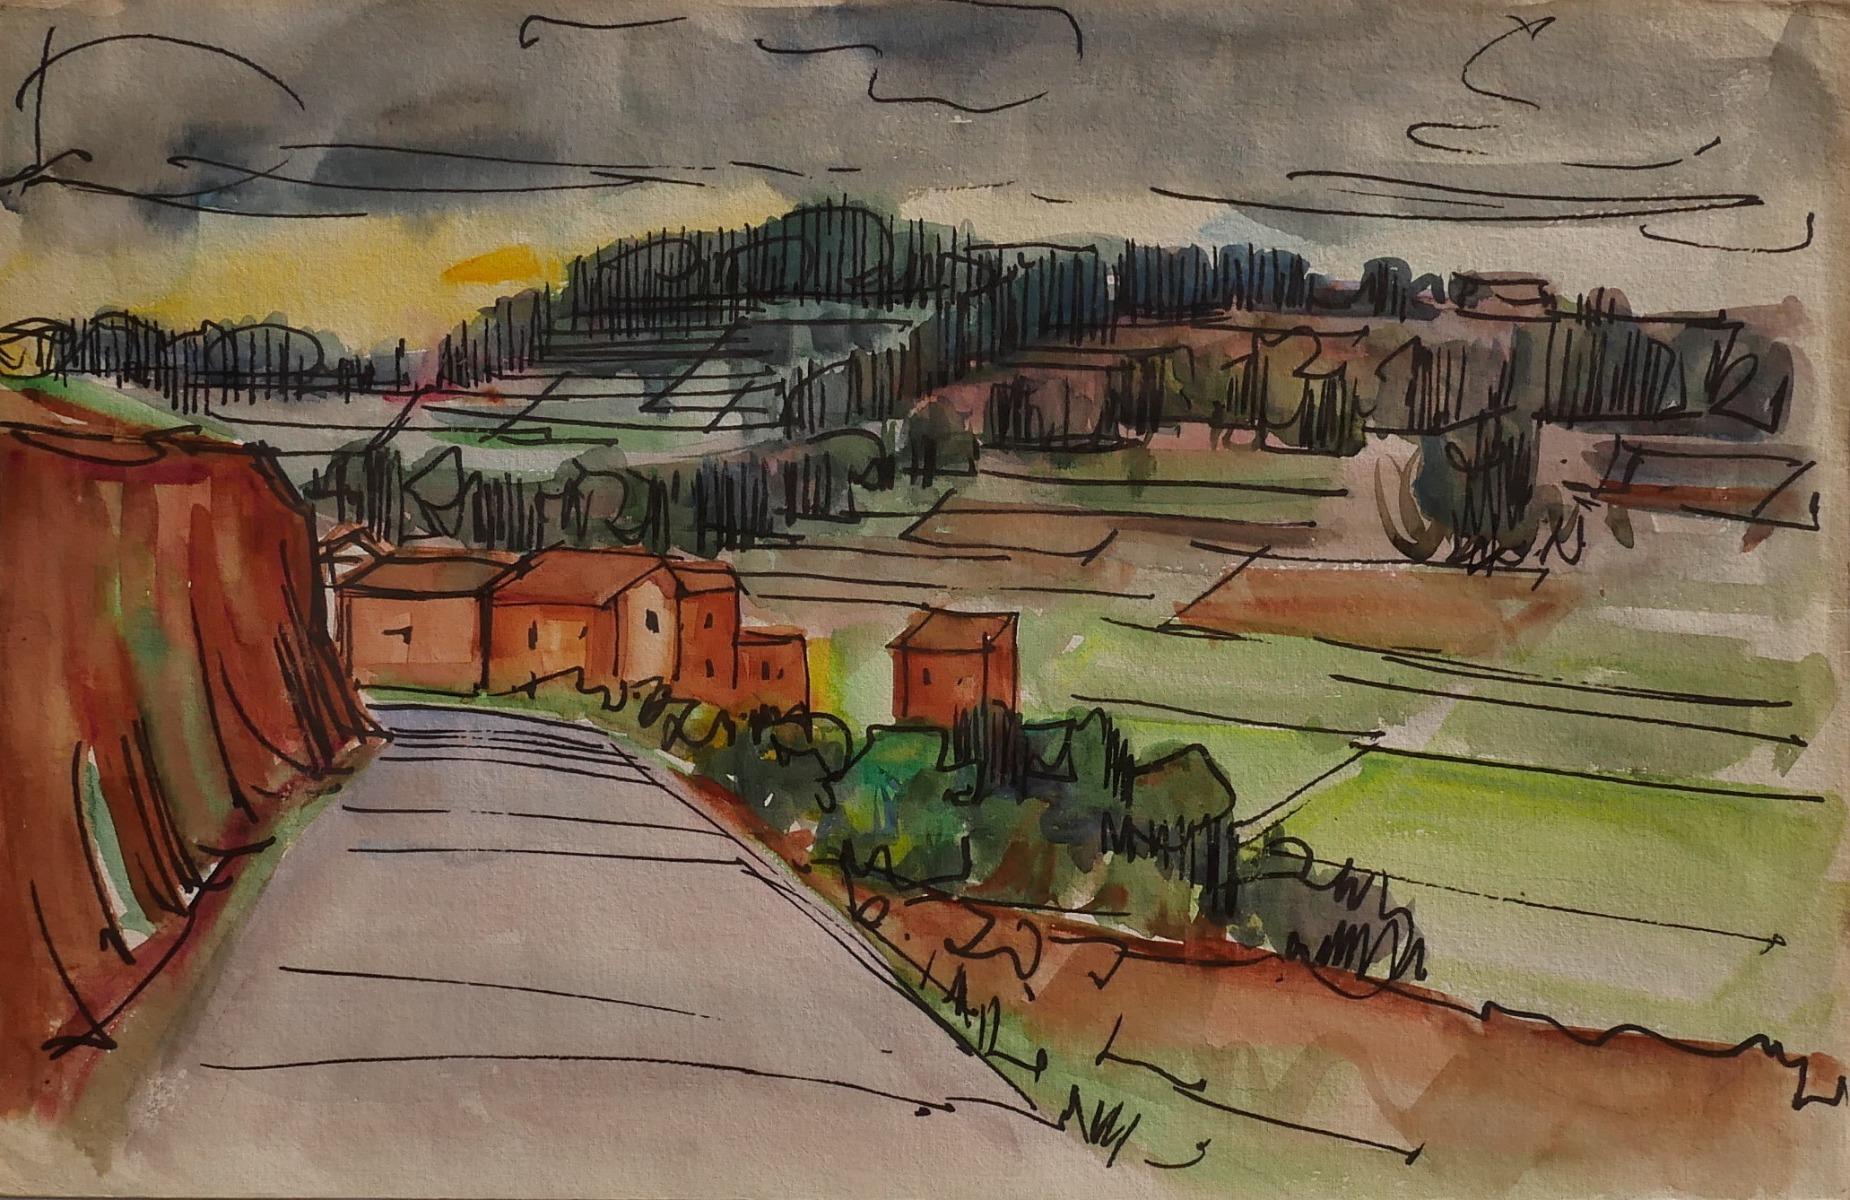 Ermanno Pavarino Landscape Art - Landscape - Ink and Watercolor Drawing by E. Pavarino - 1969